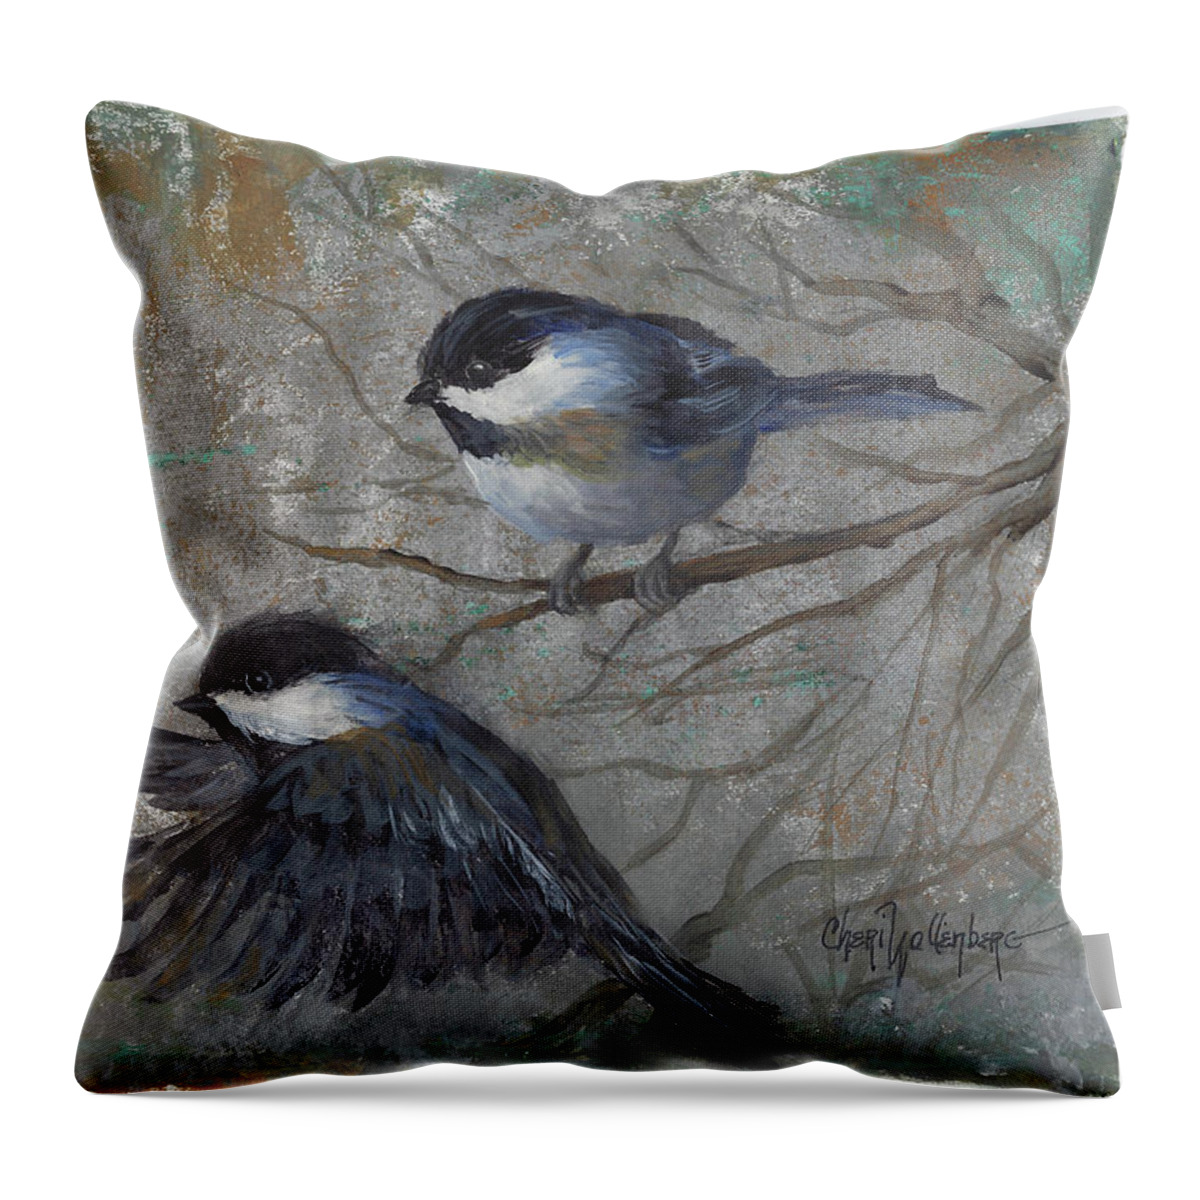 Songbird Throw Pillow featuring the painting Two Chickadees by Cheri Wollenberg